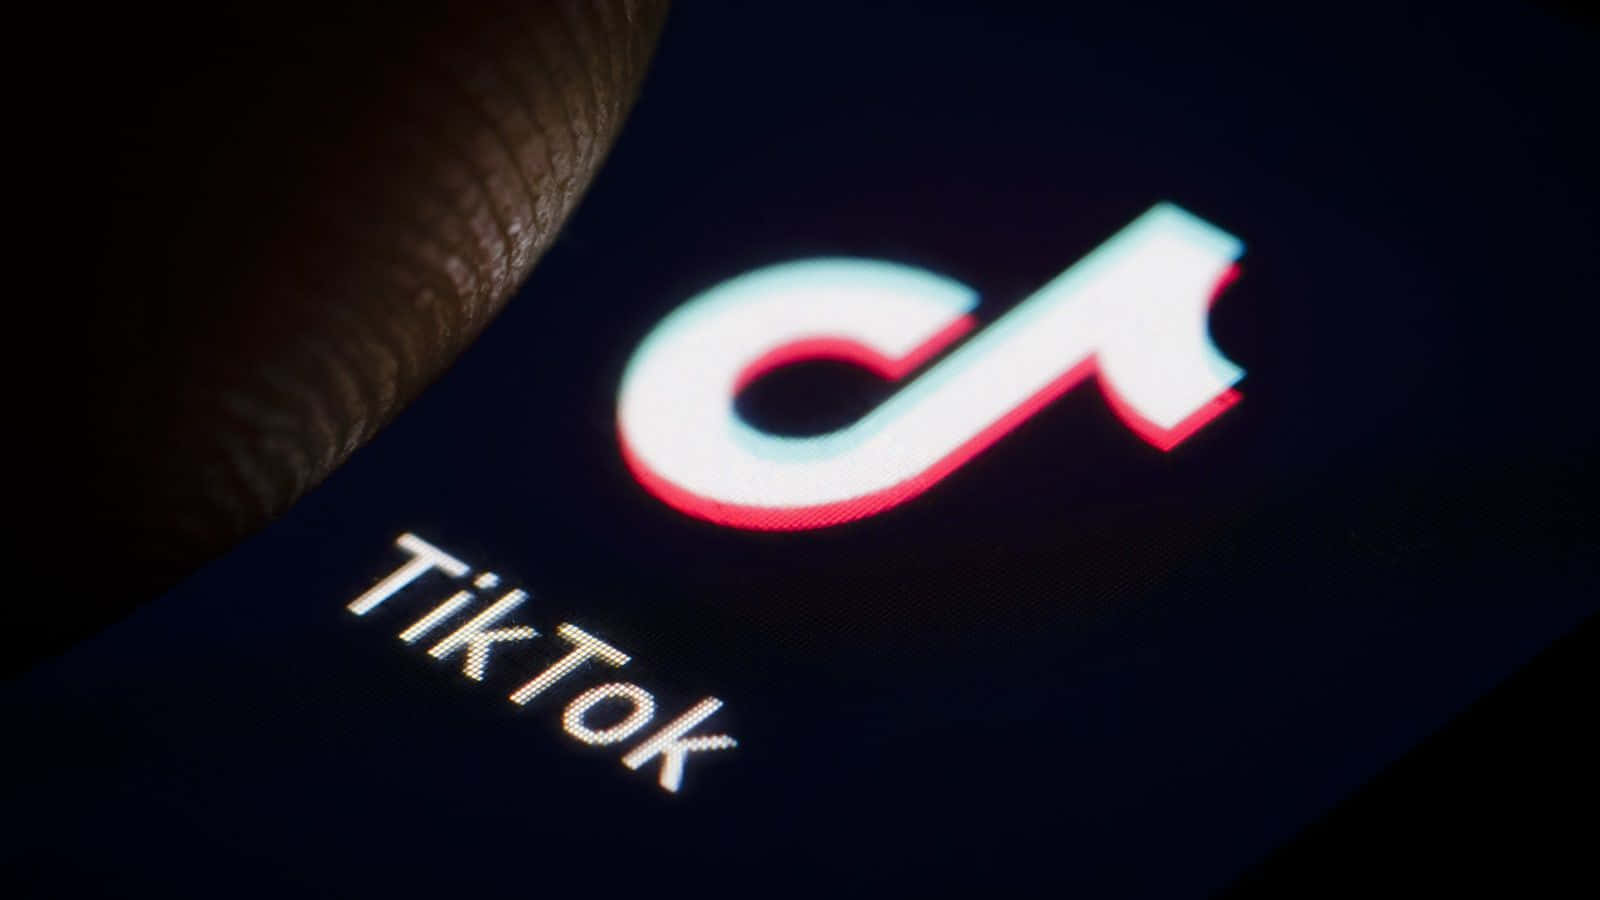 tiktok is a social media app that allows users to share videos and photos